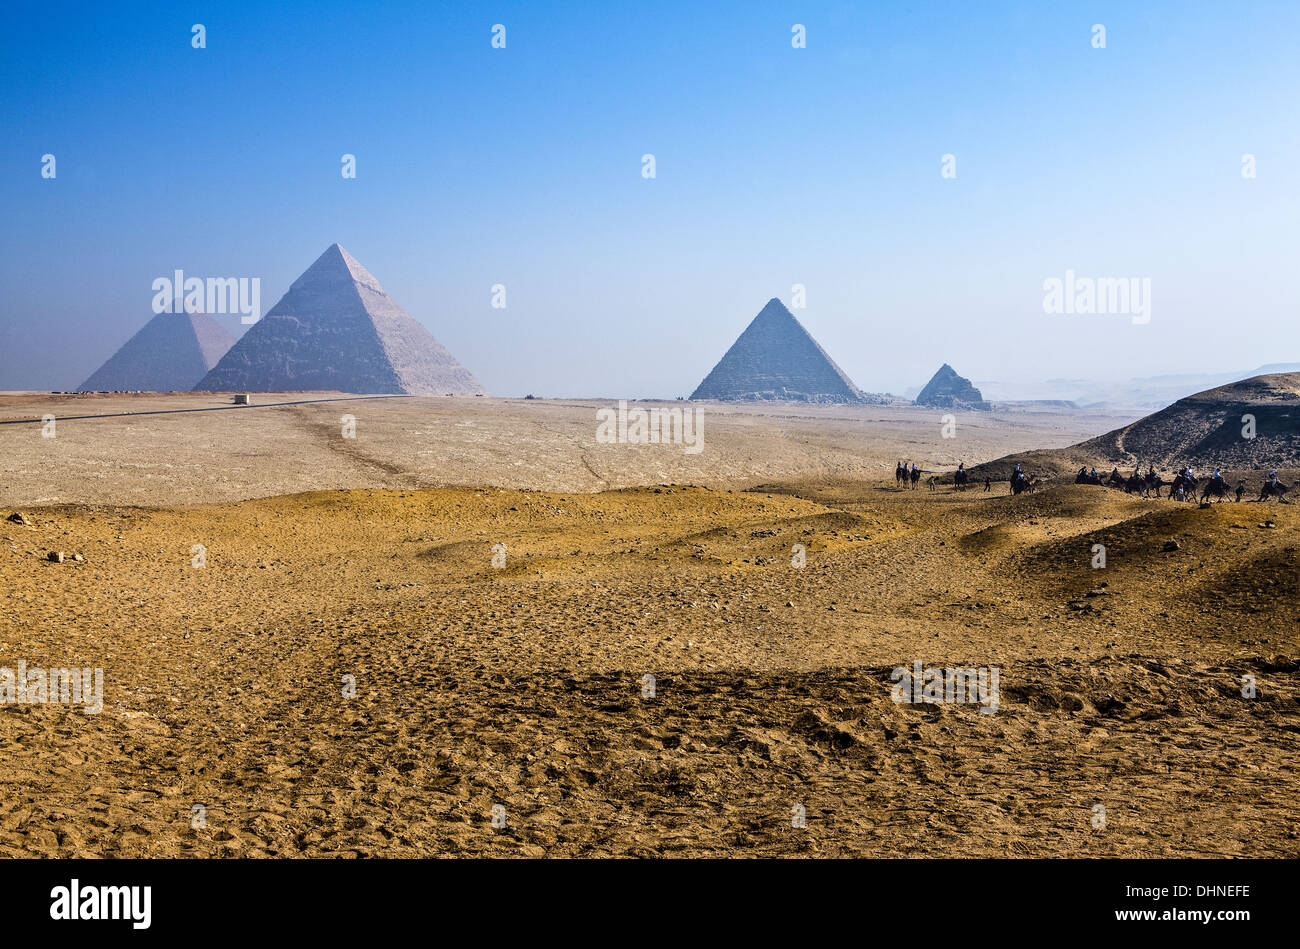 Africa, Egypt, the pyramids of the archaeological site of Giza Stock Photo